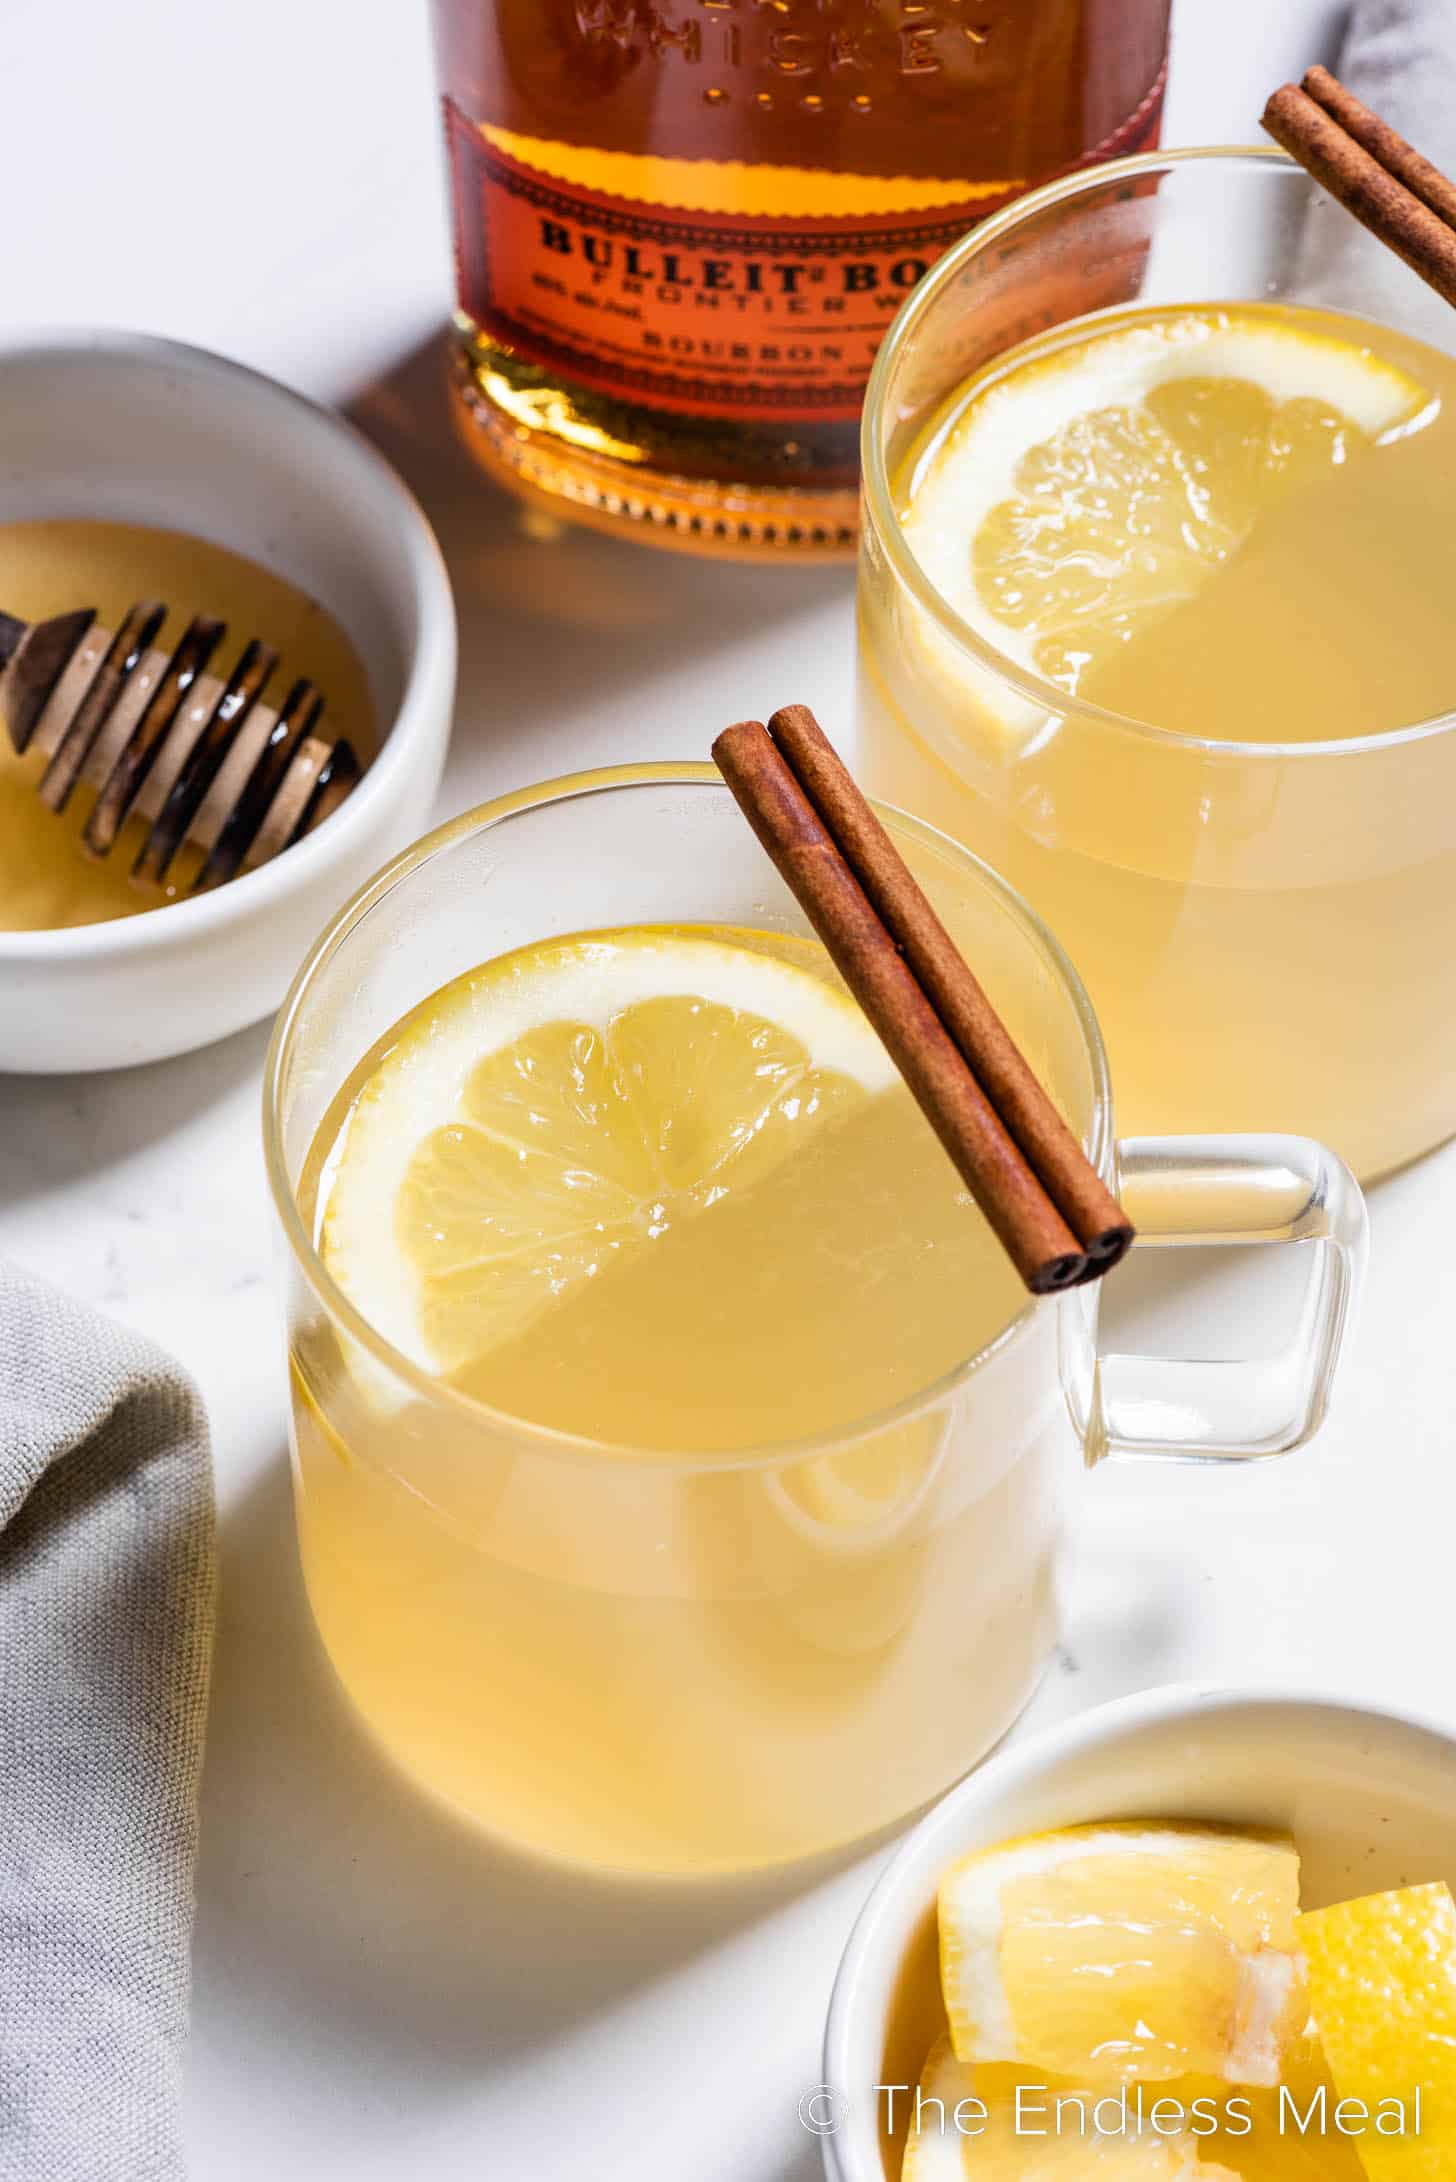 Hot toddy with whiskey in a glass mug